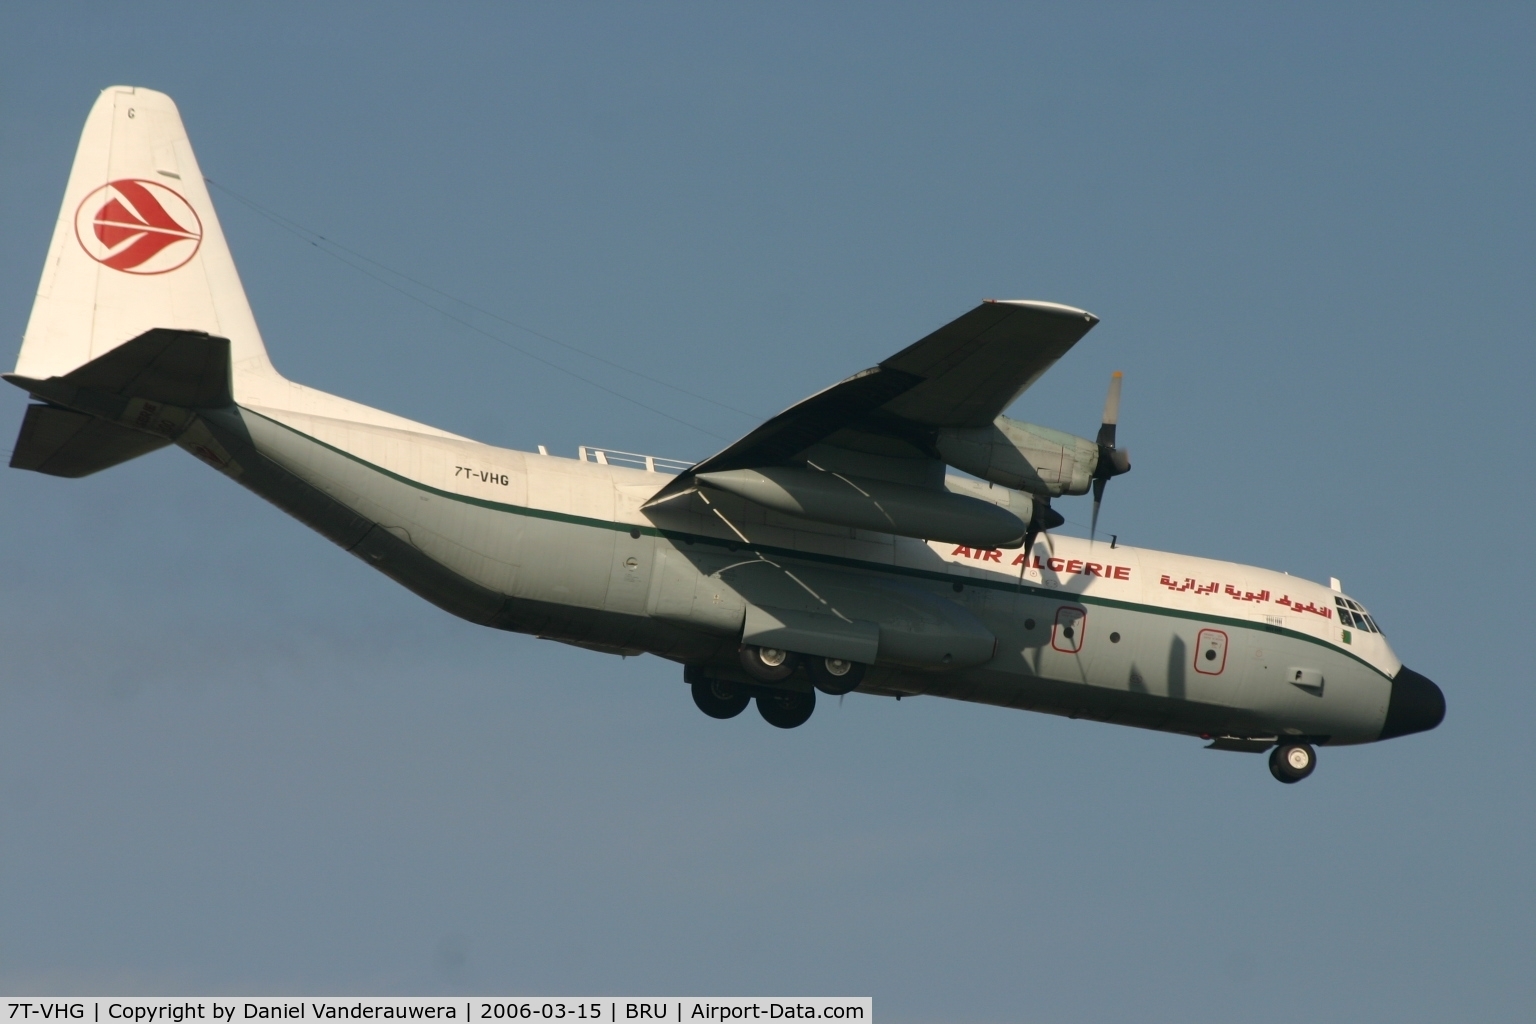 7T-VHG, 1981 Lockheed L-100-30 Hercules (L-382G) C/N 382-4880, descending to rwy 02 + crashed in Italy on August 13, 2006